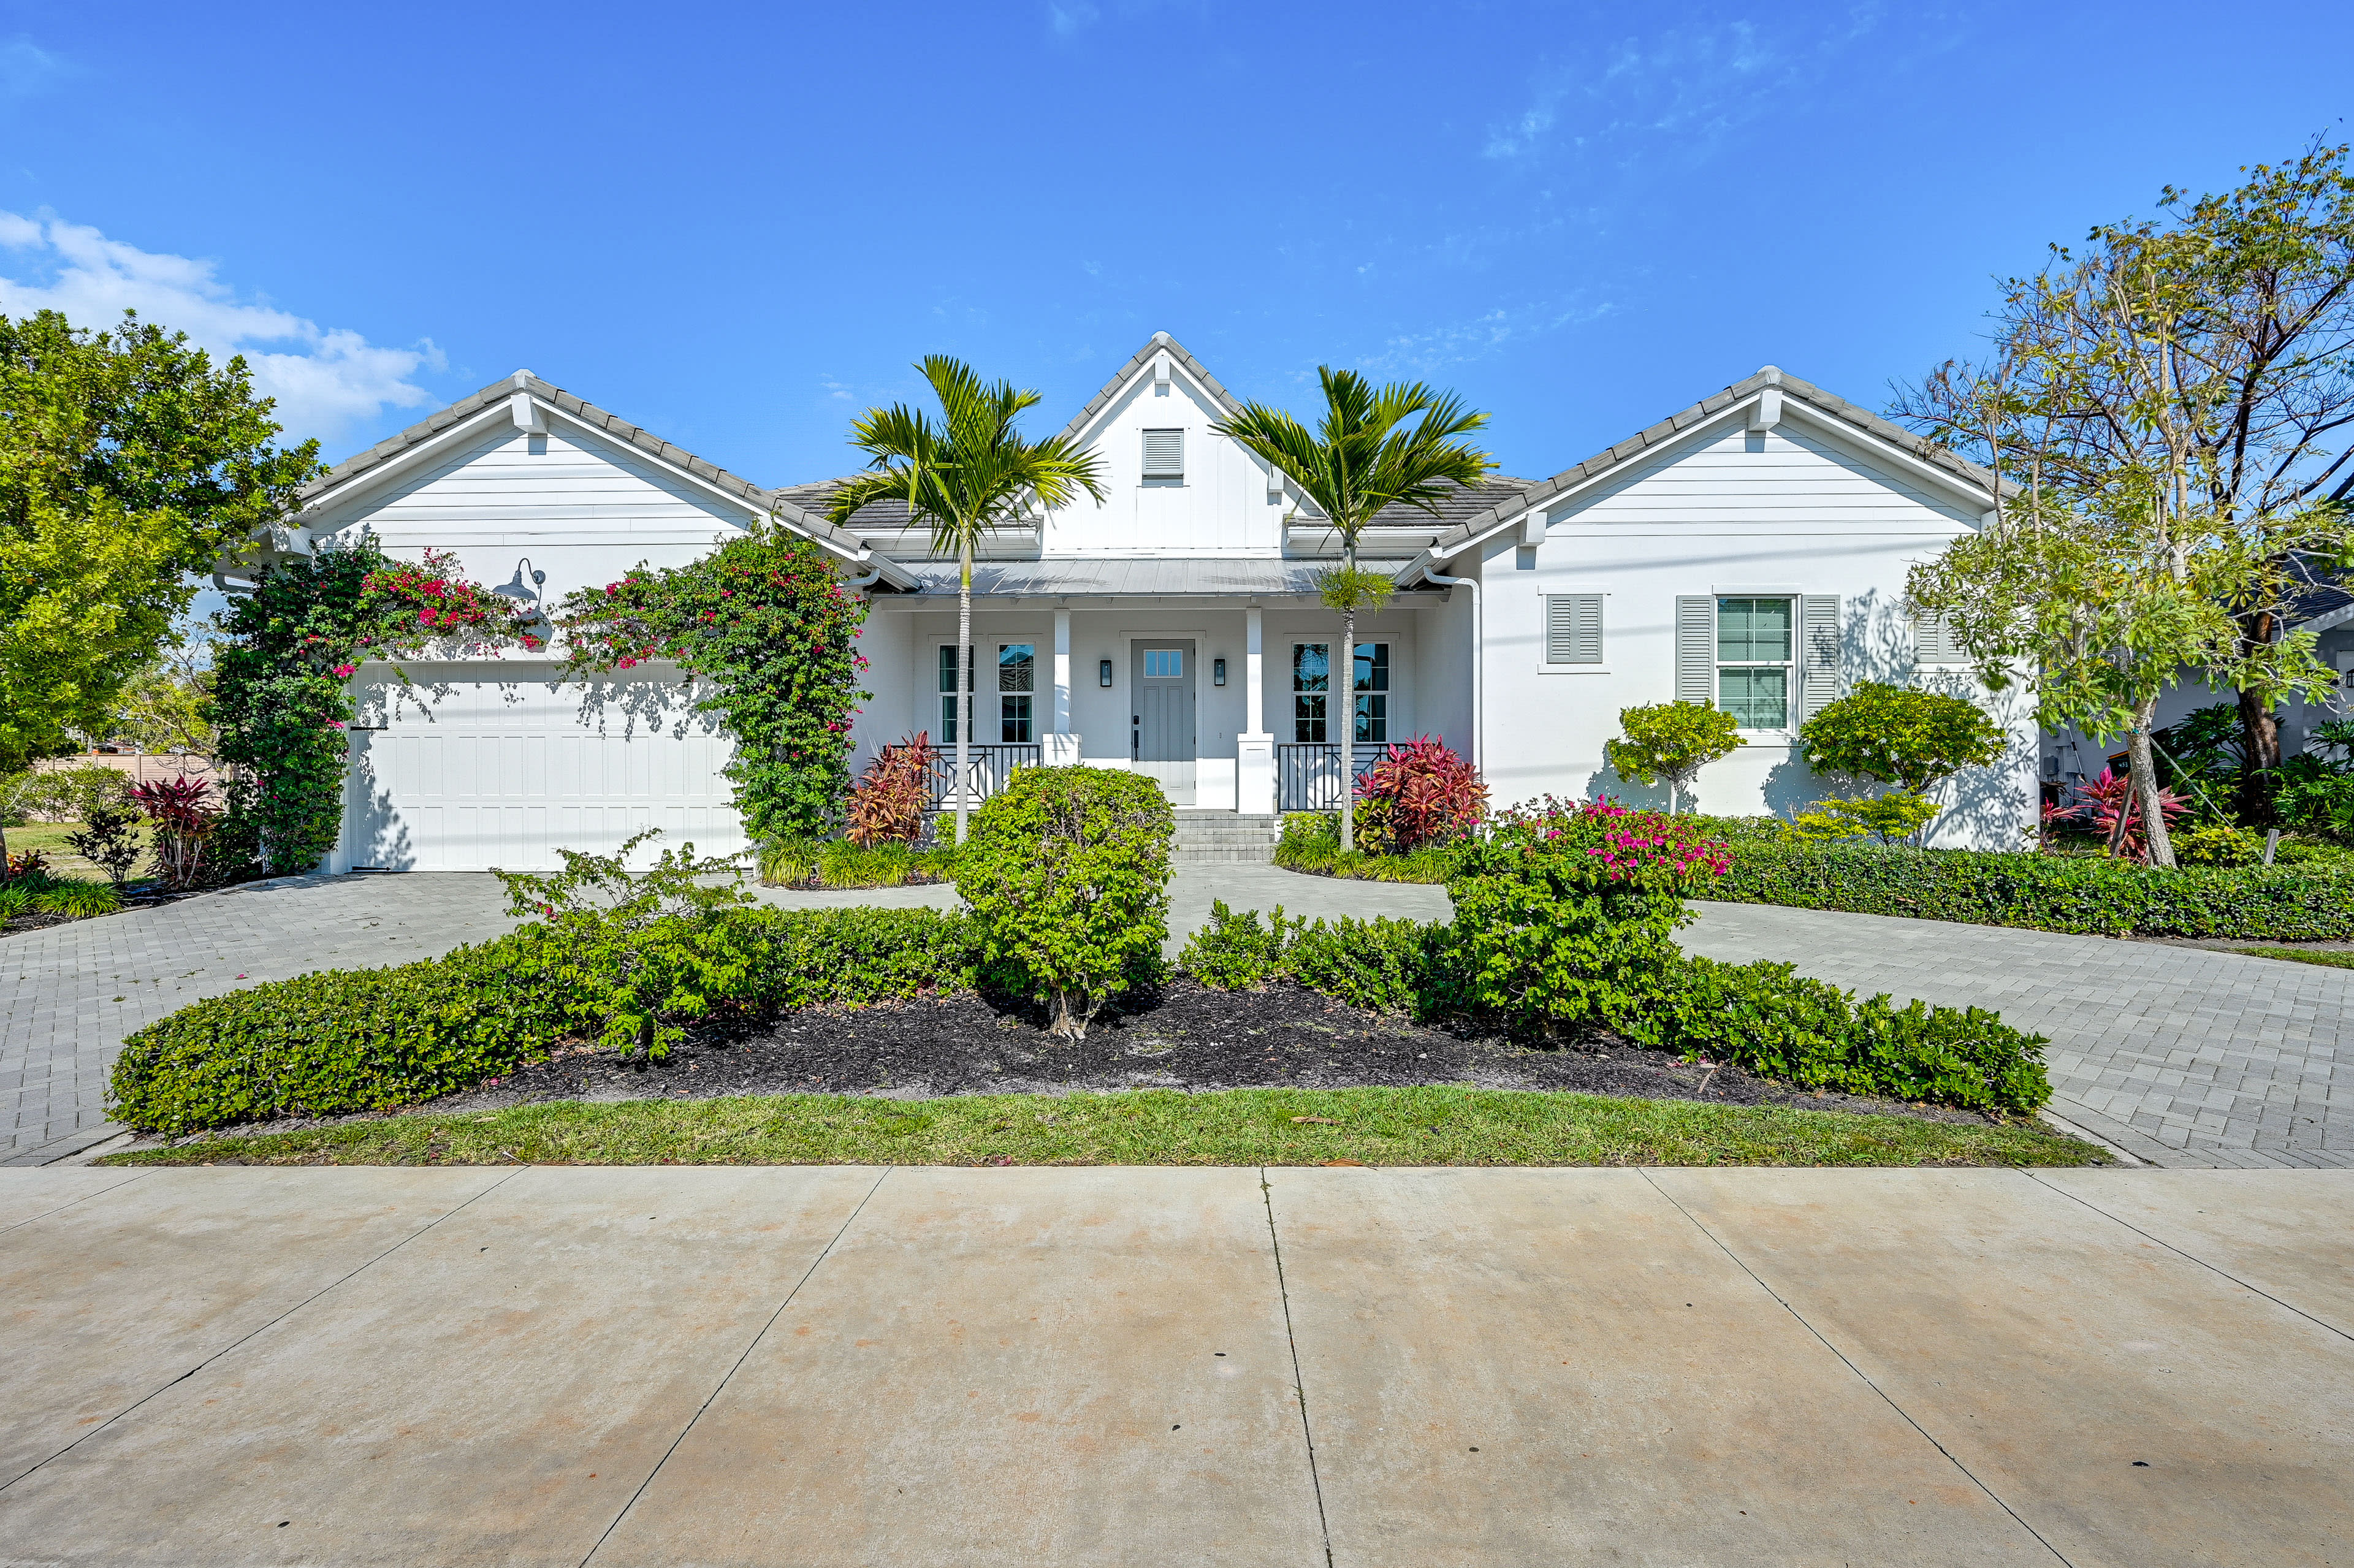 Marco Island Vacation Rental | 4BR | 4.5BA | 4 Steps Required | 2,644 Sq Ft